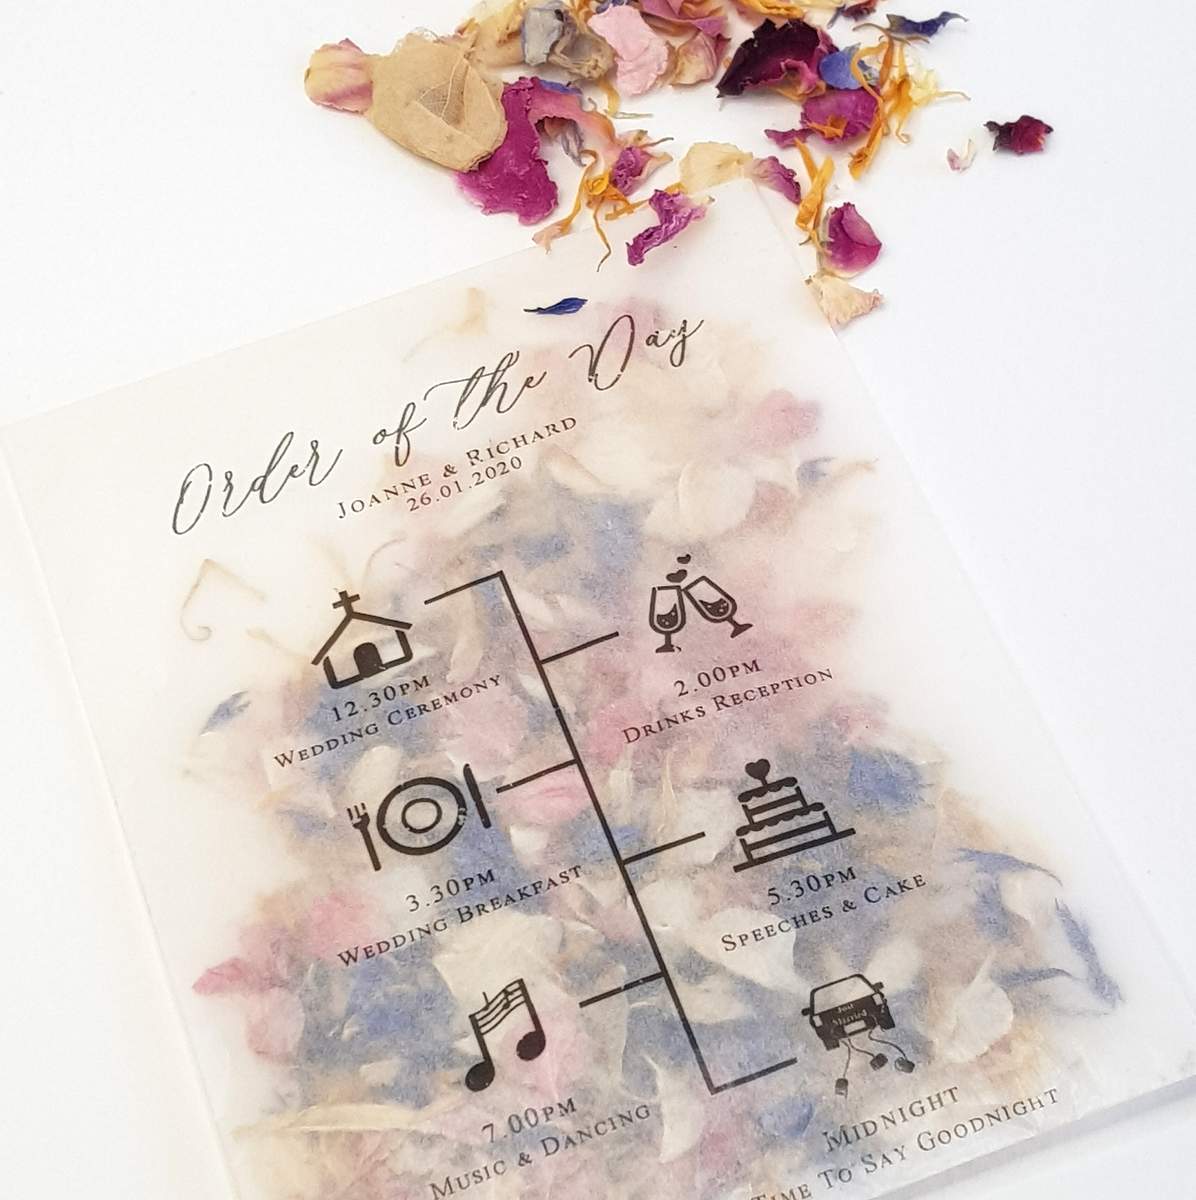 personalised wedding confetti bag with an order of the day timeline, filled with colourful natural dried flower petal biodegradable confetti